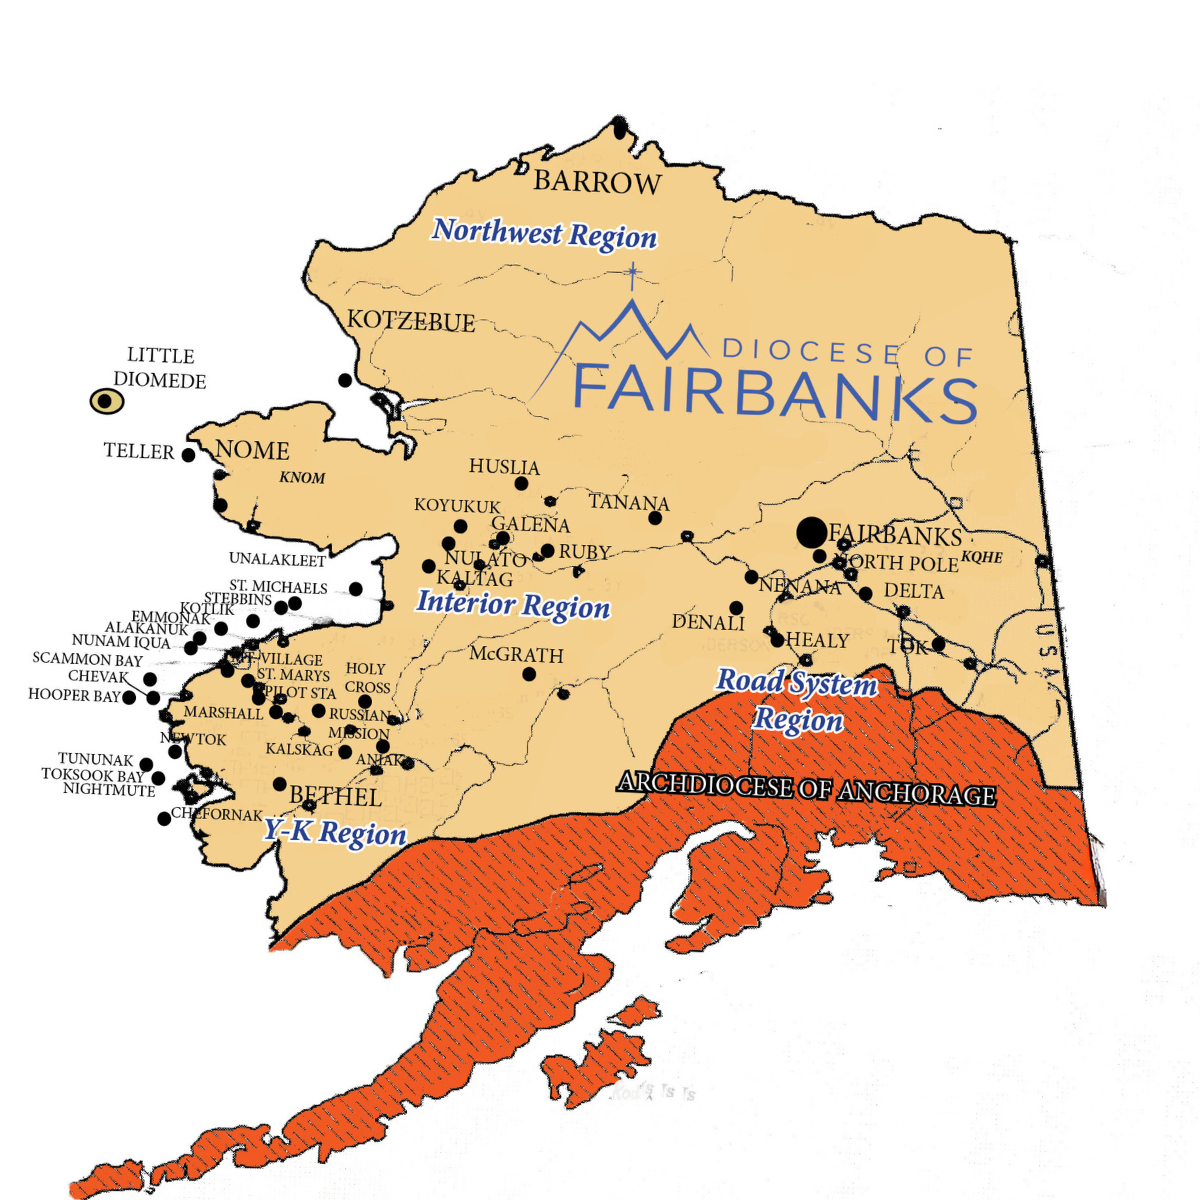 Diocese of Fairbanks